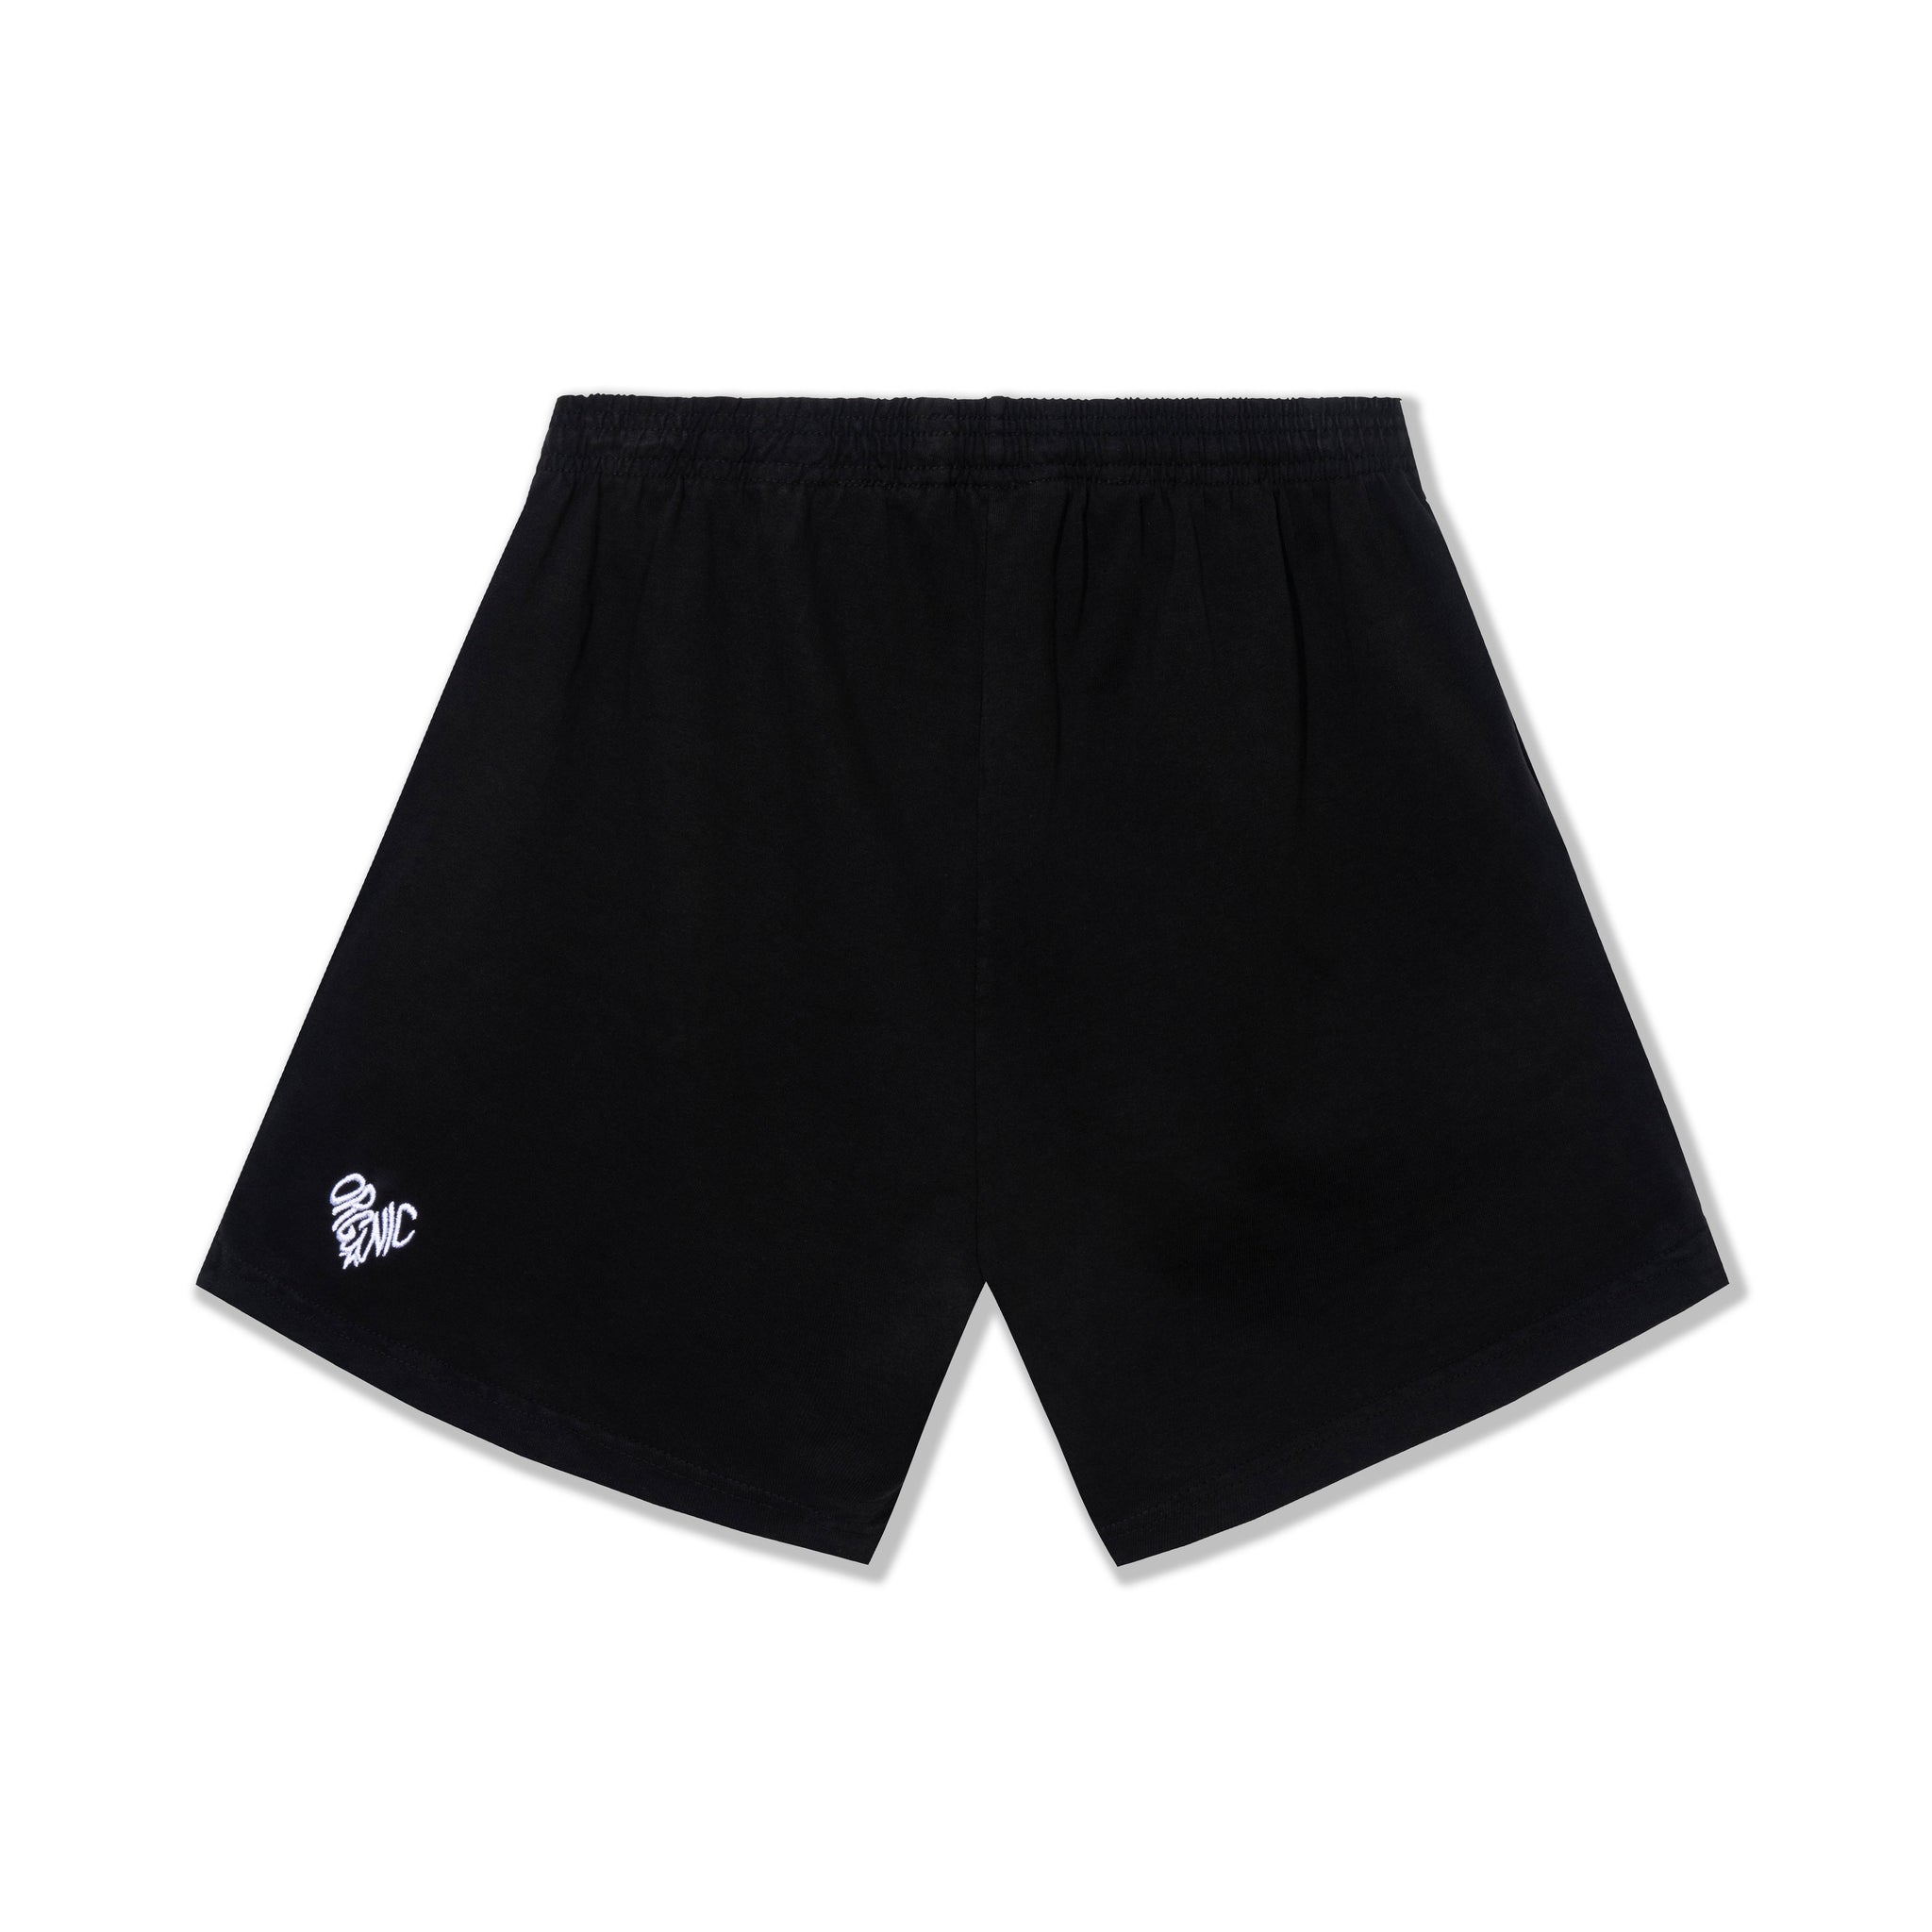 LOVE APPROVED SHORTS - BLACK